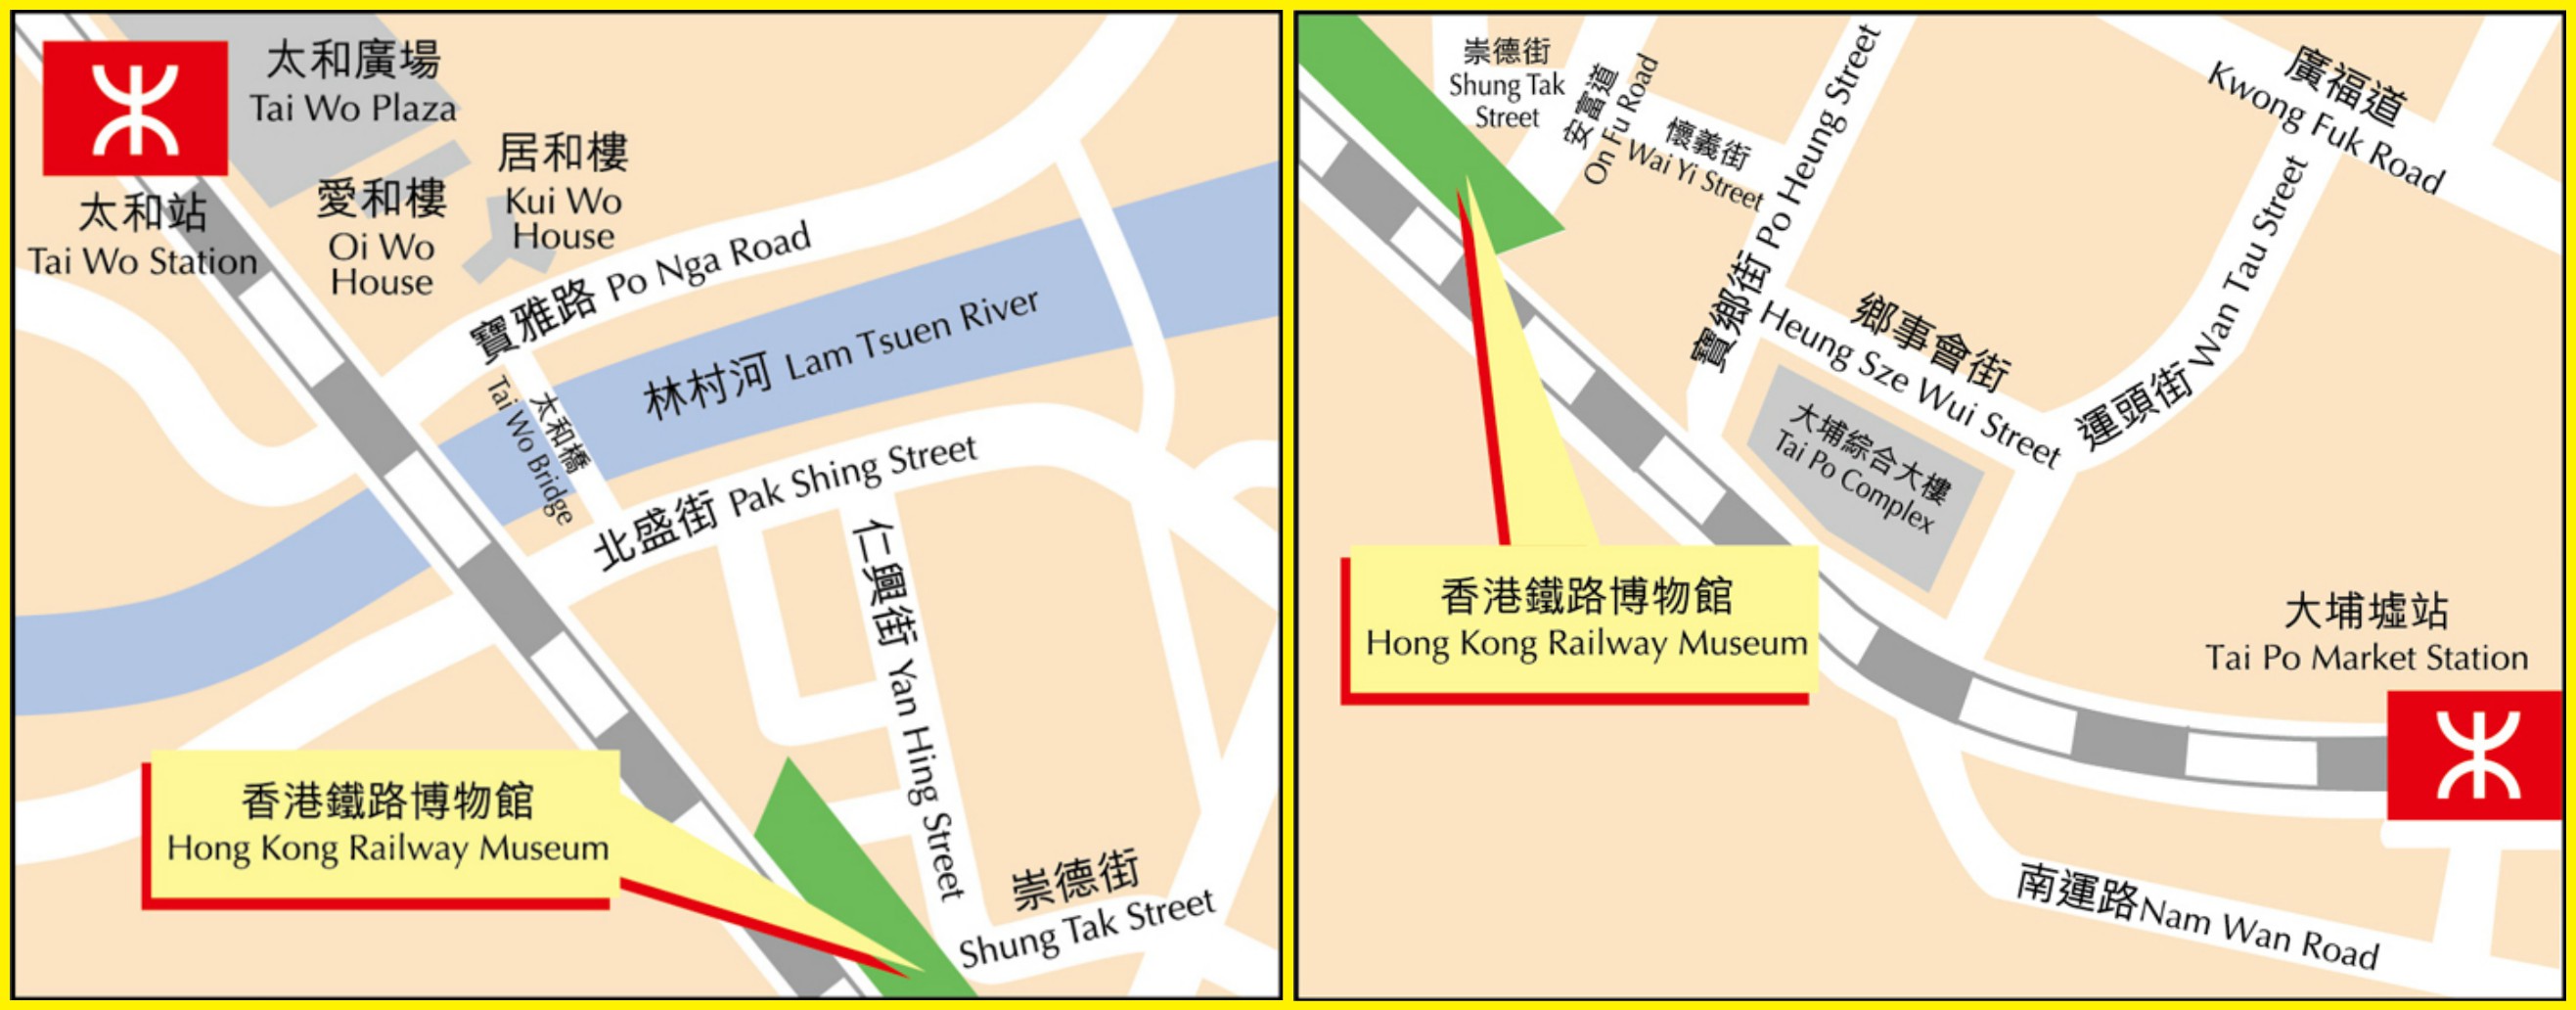 Location of the Hong Kong Railway Museum